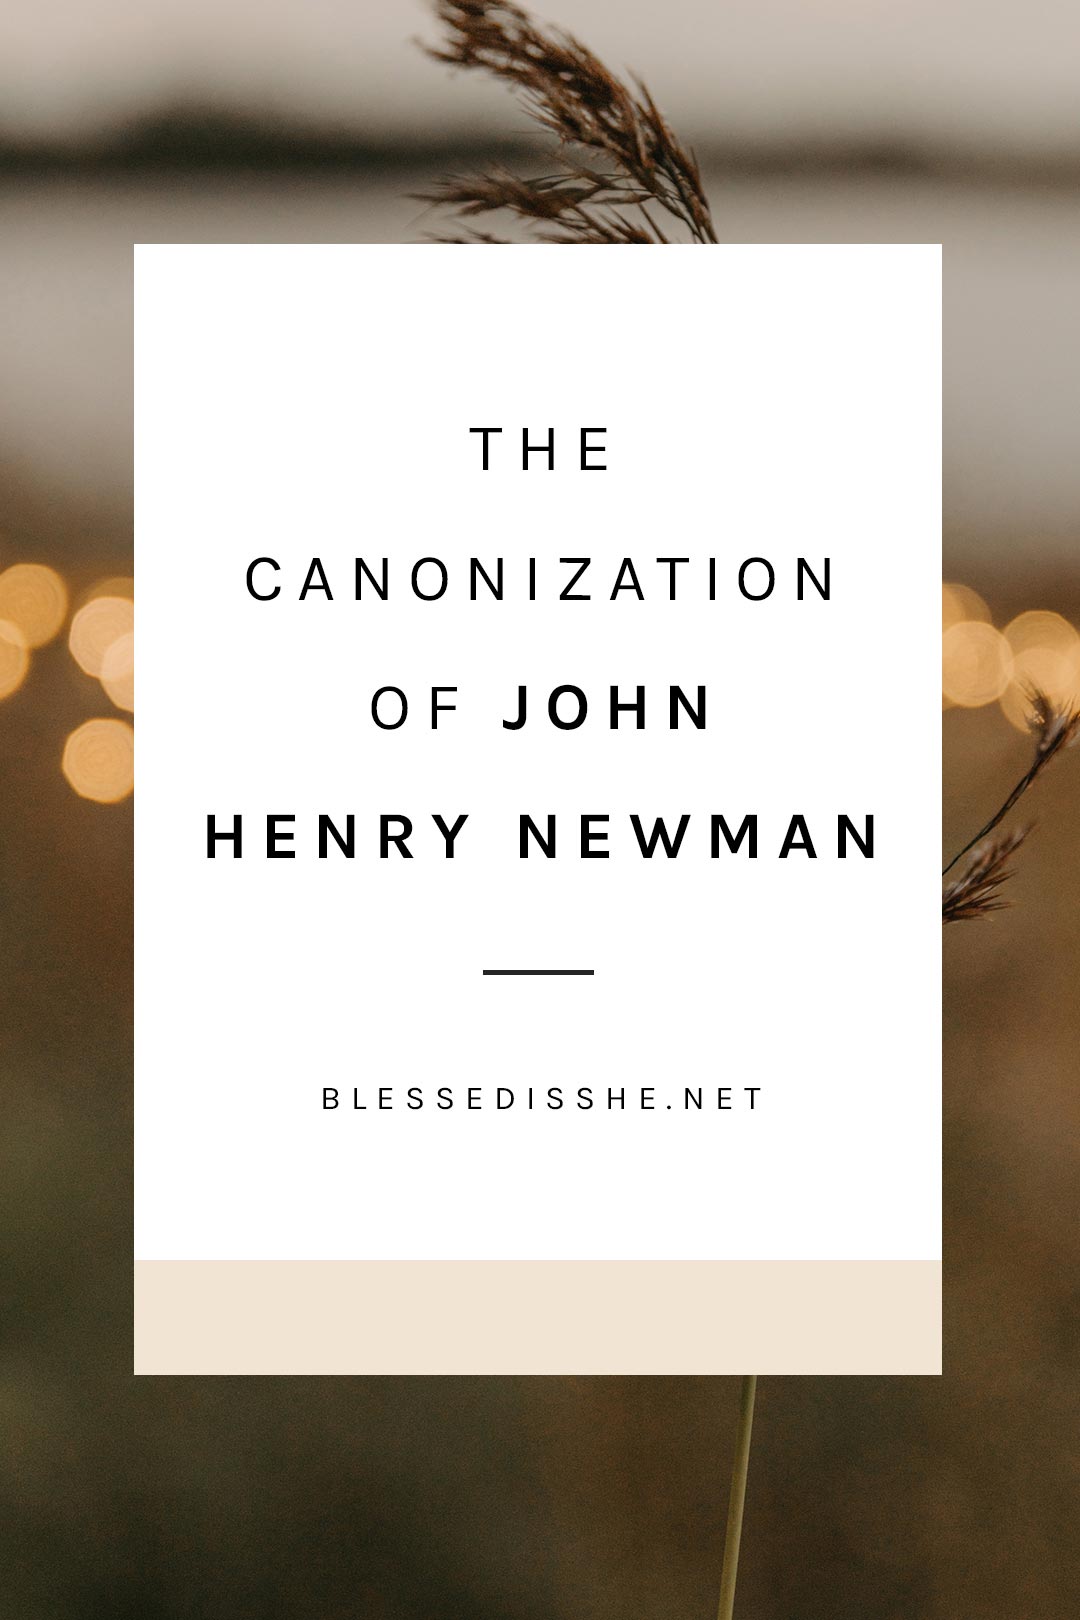 who is john henry newman